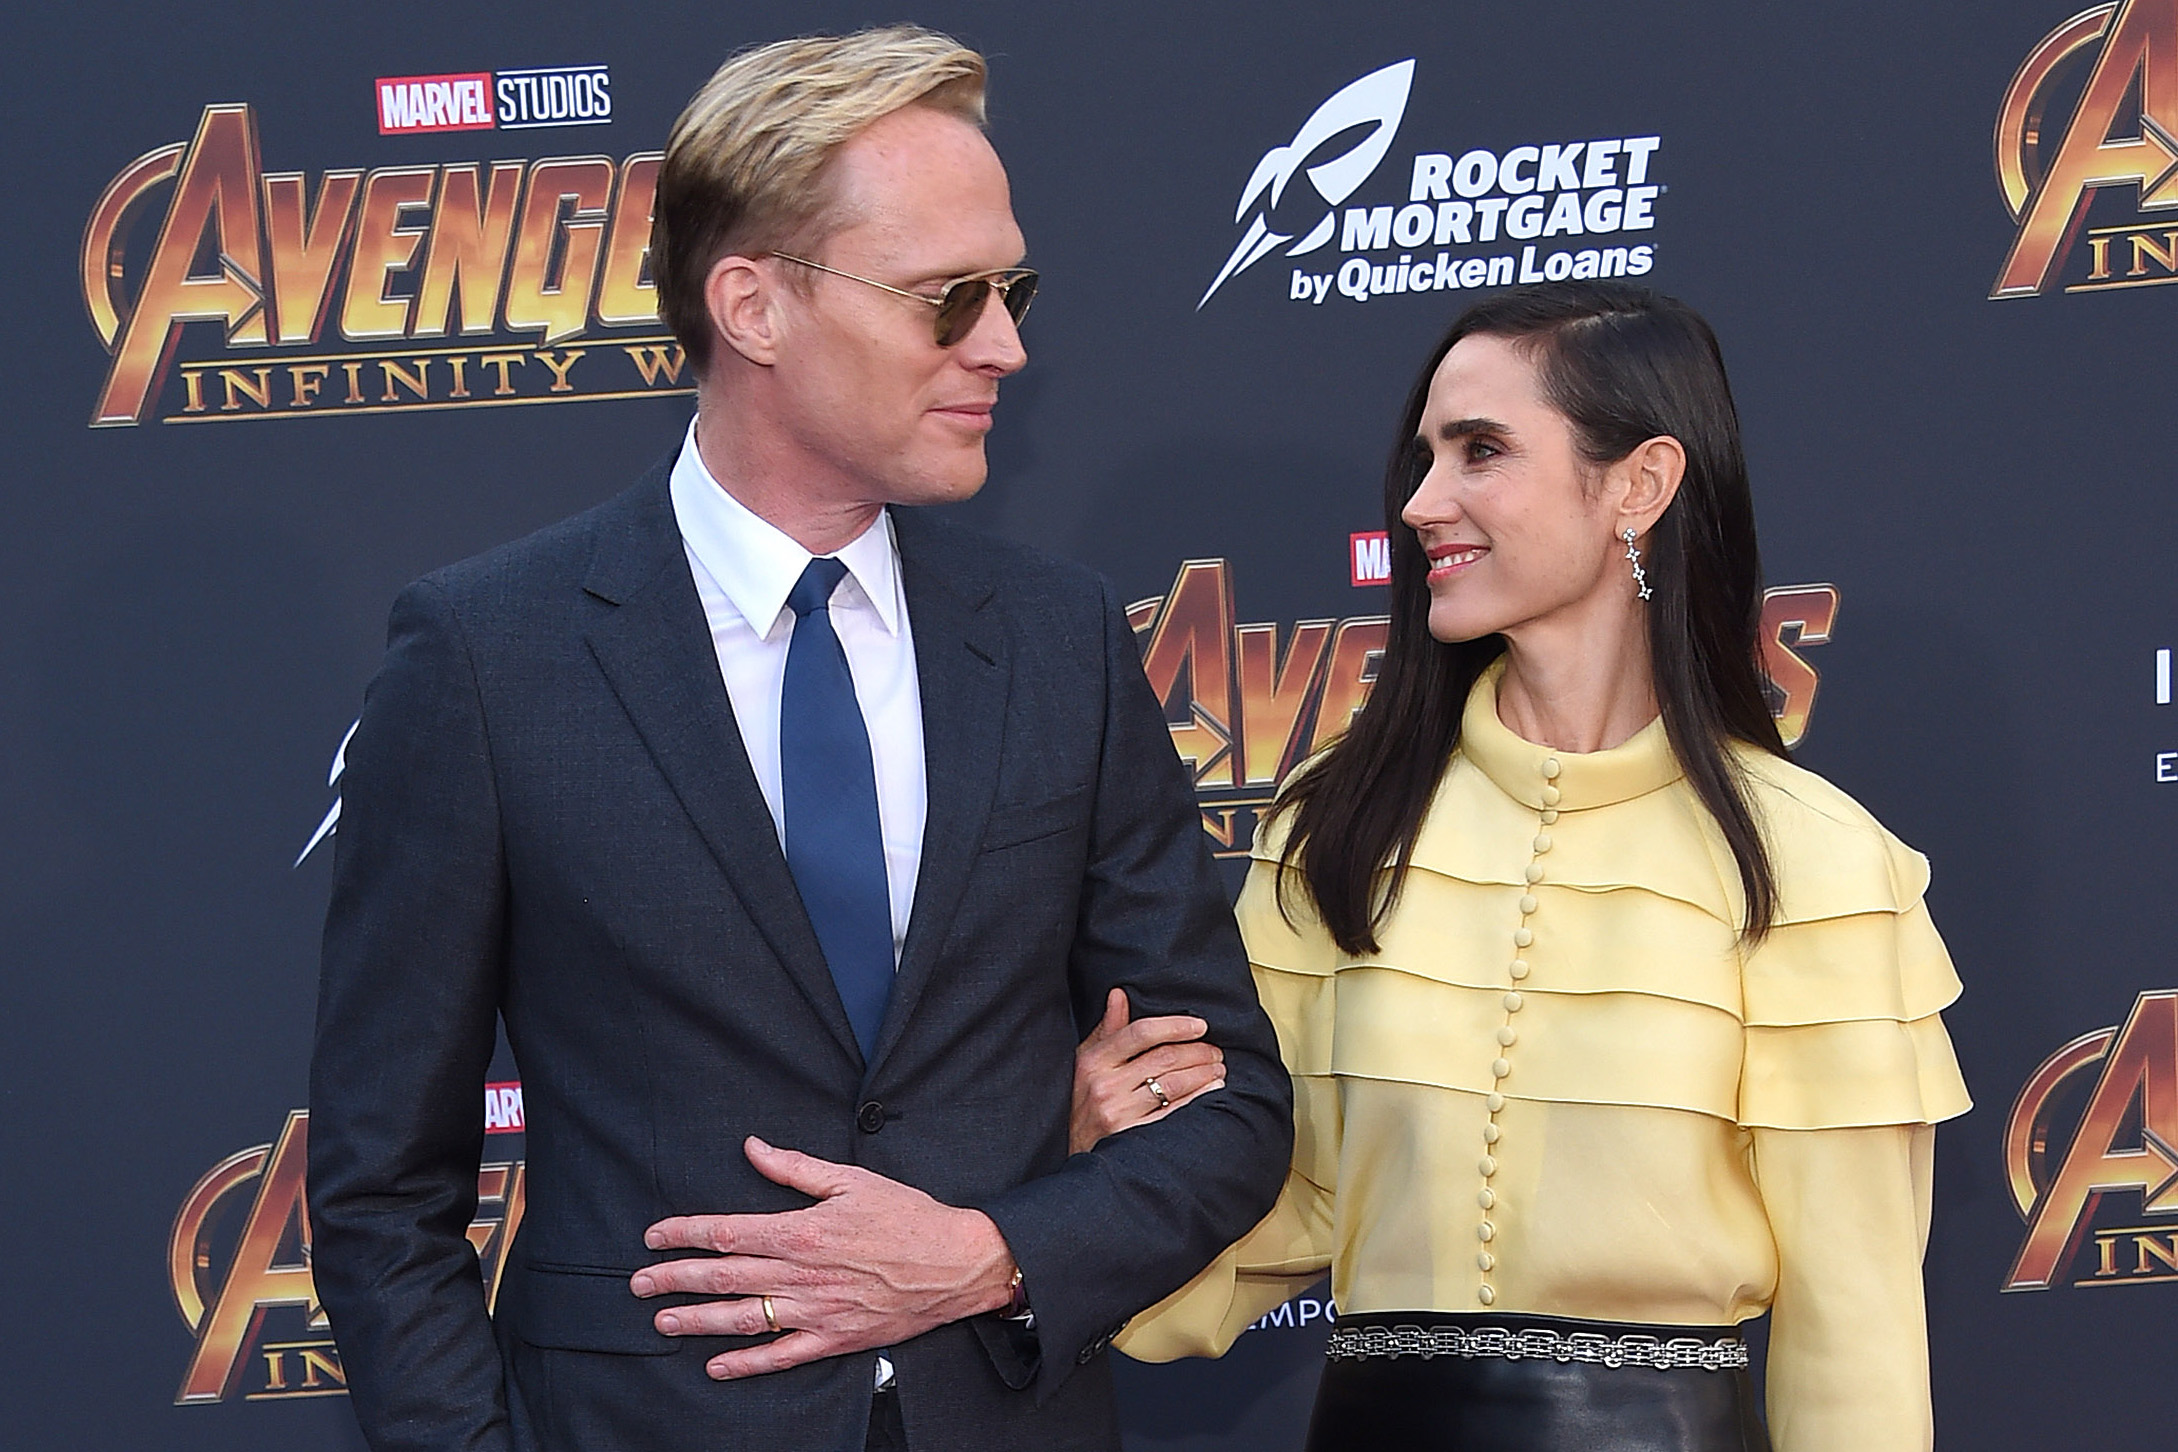 Paul Bettany's Hilarious Response to Jennifer Connelly's Win